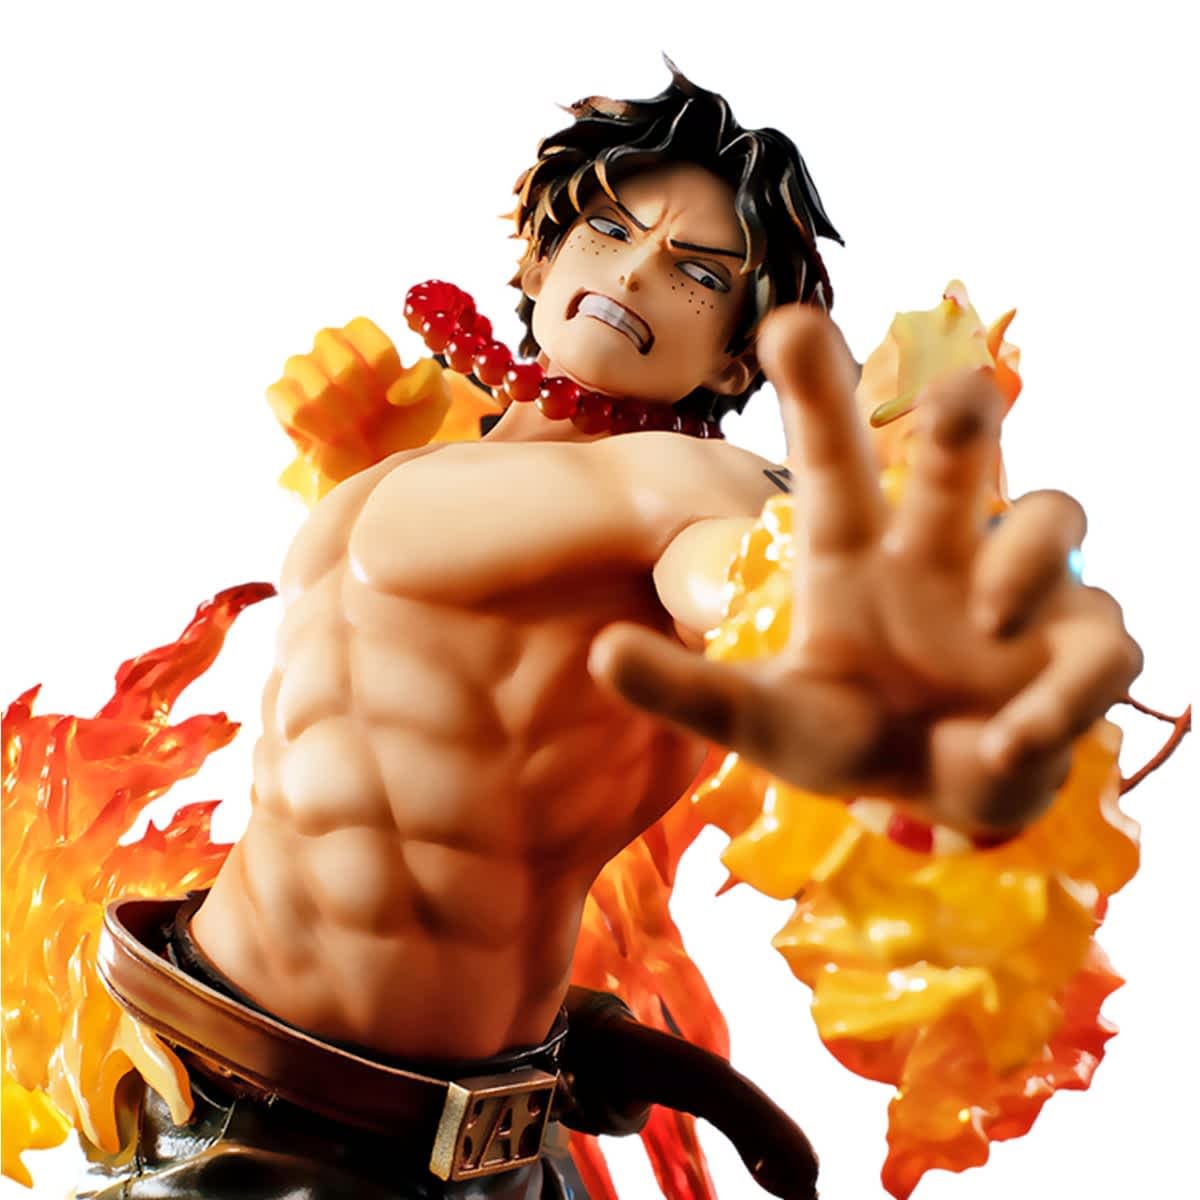 One Piece Portgas D Ace Gets A Limited Edition Statue From Megahouse